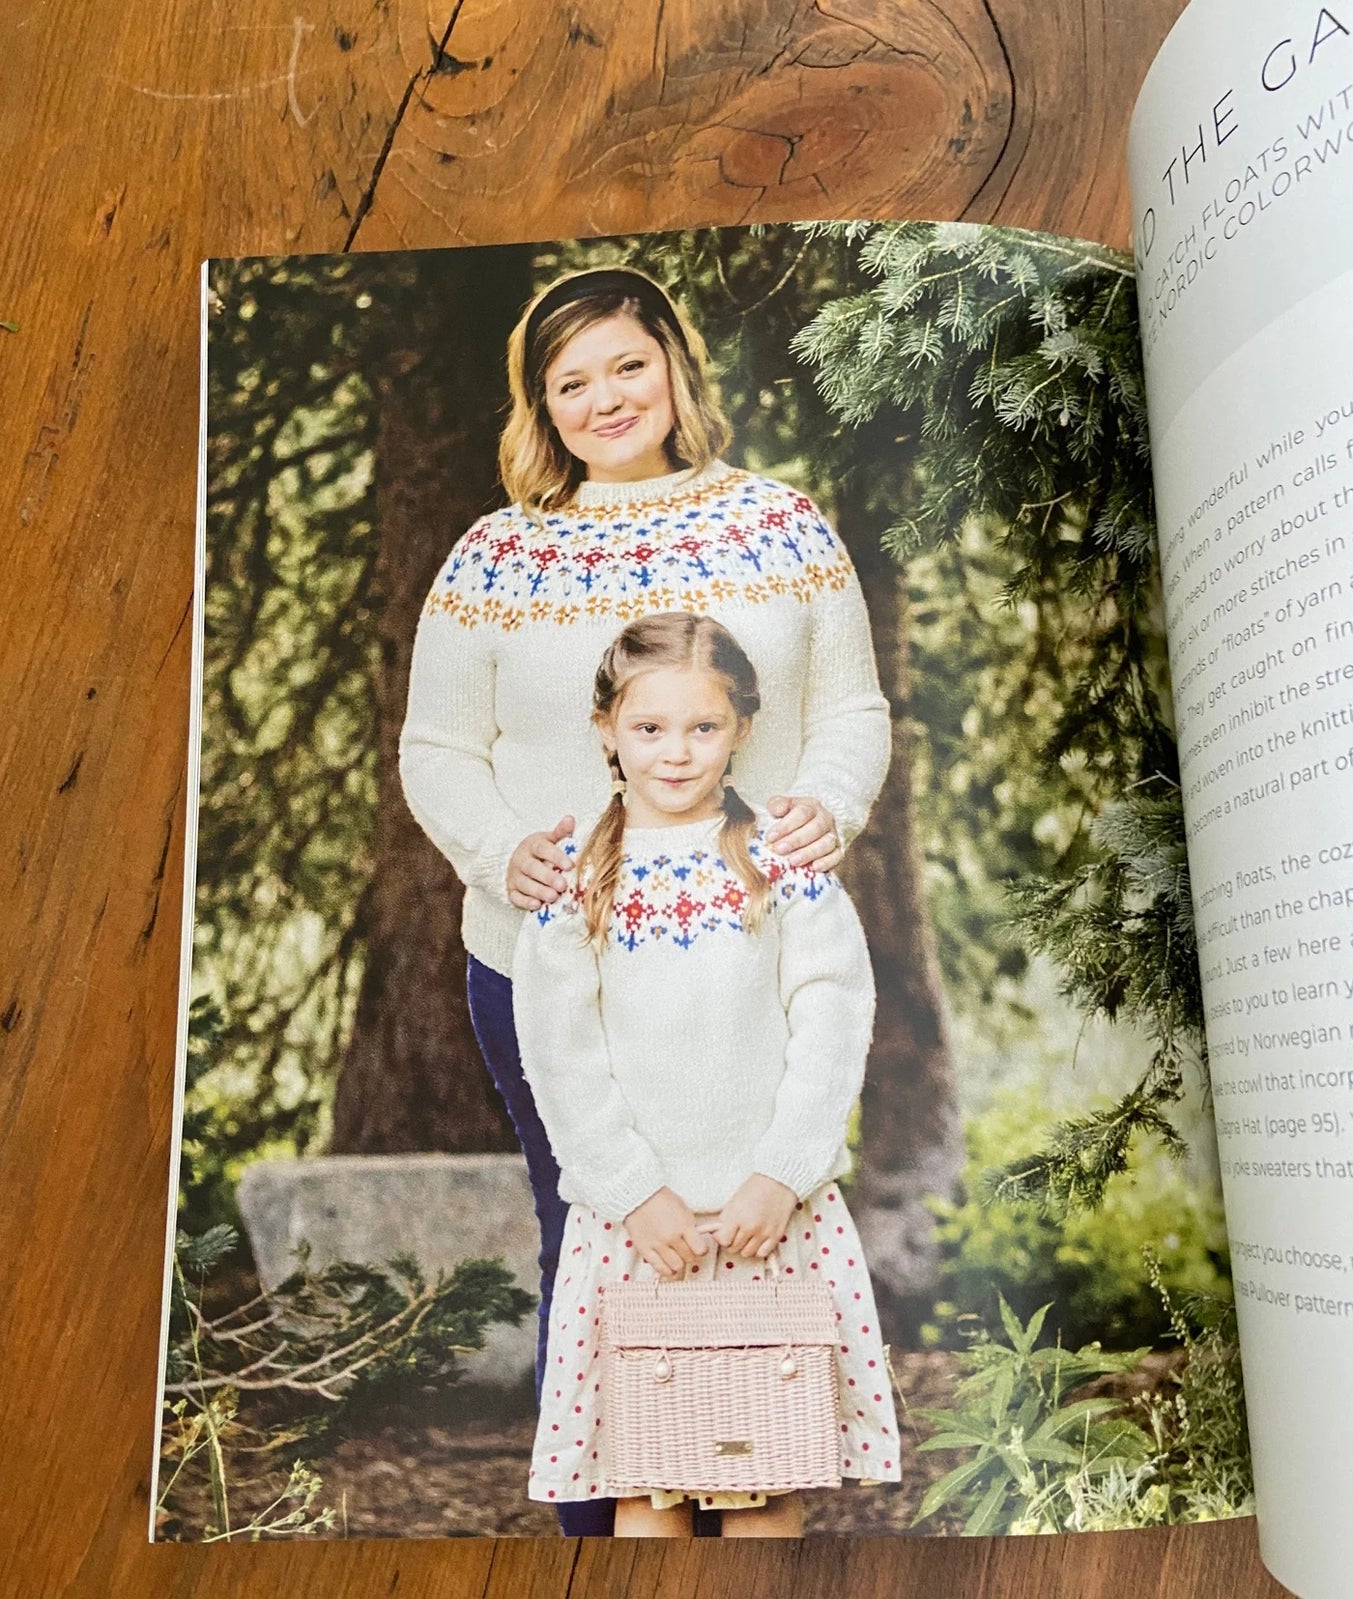 The Nordic Knitting Primer Book